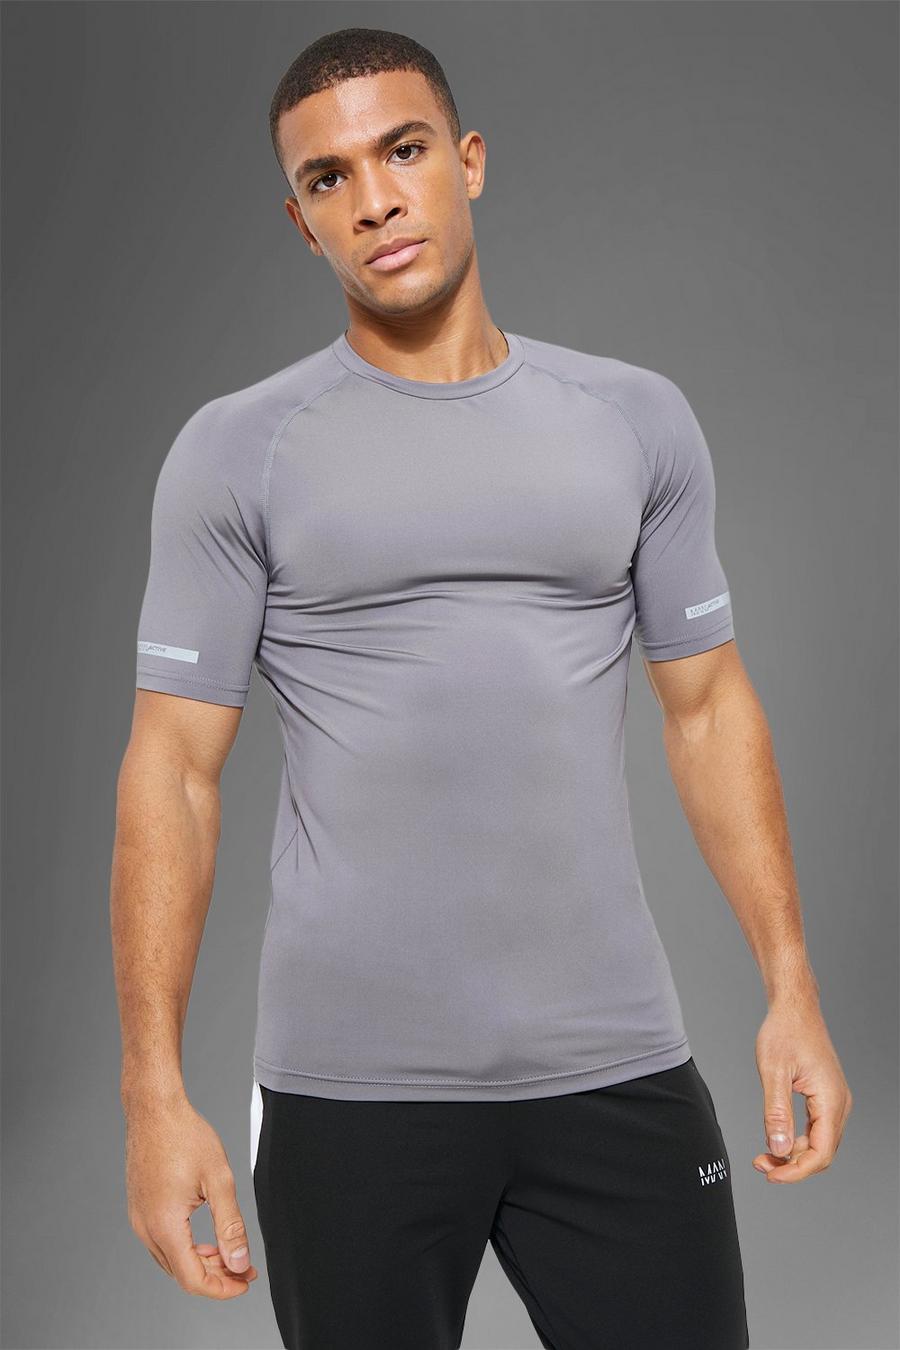 Charcoal gris Man Active Performance Muscle Fit Raglan Tee image number 1